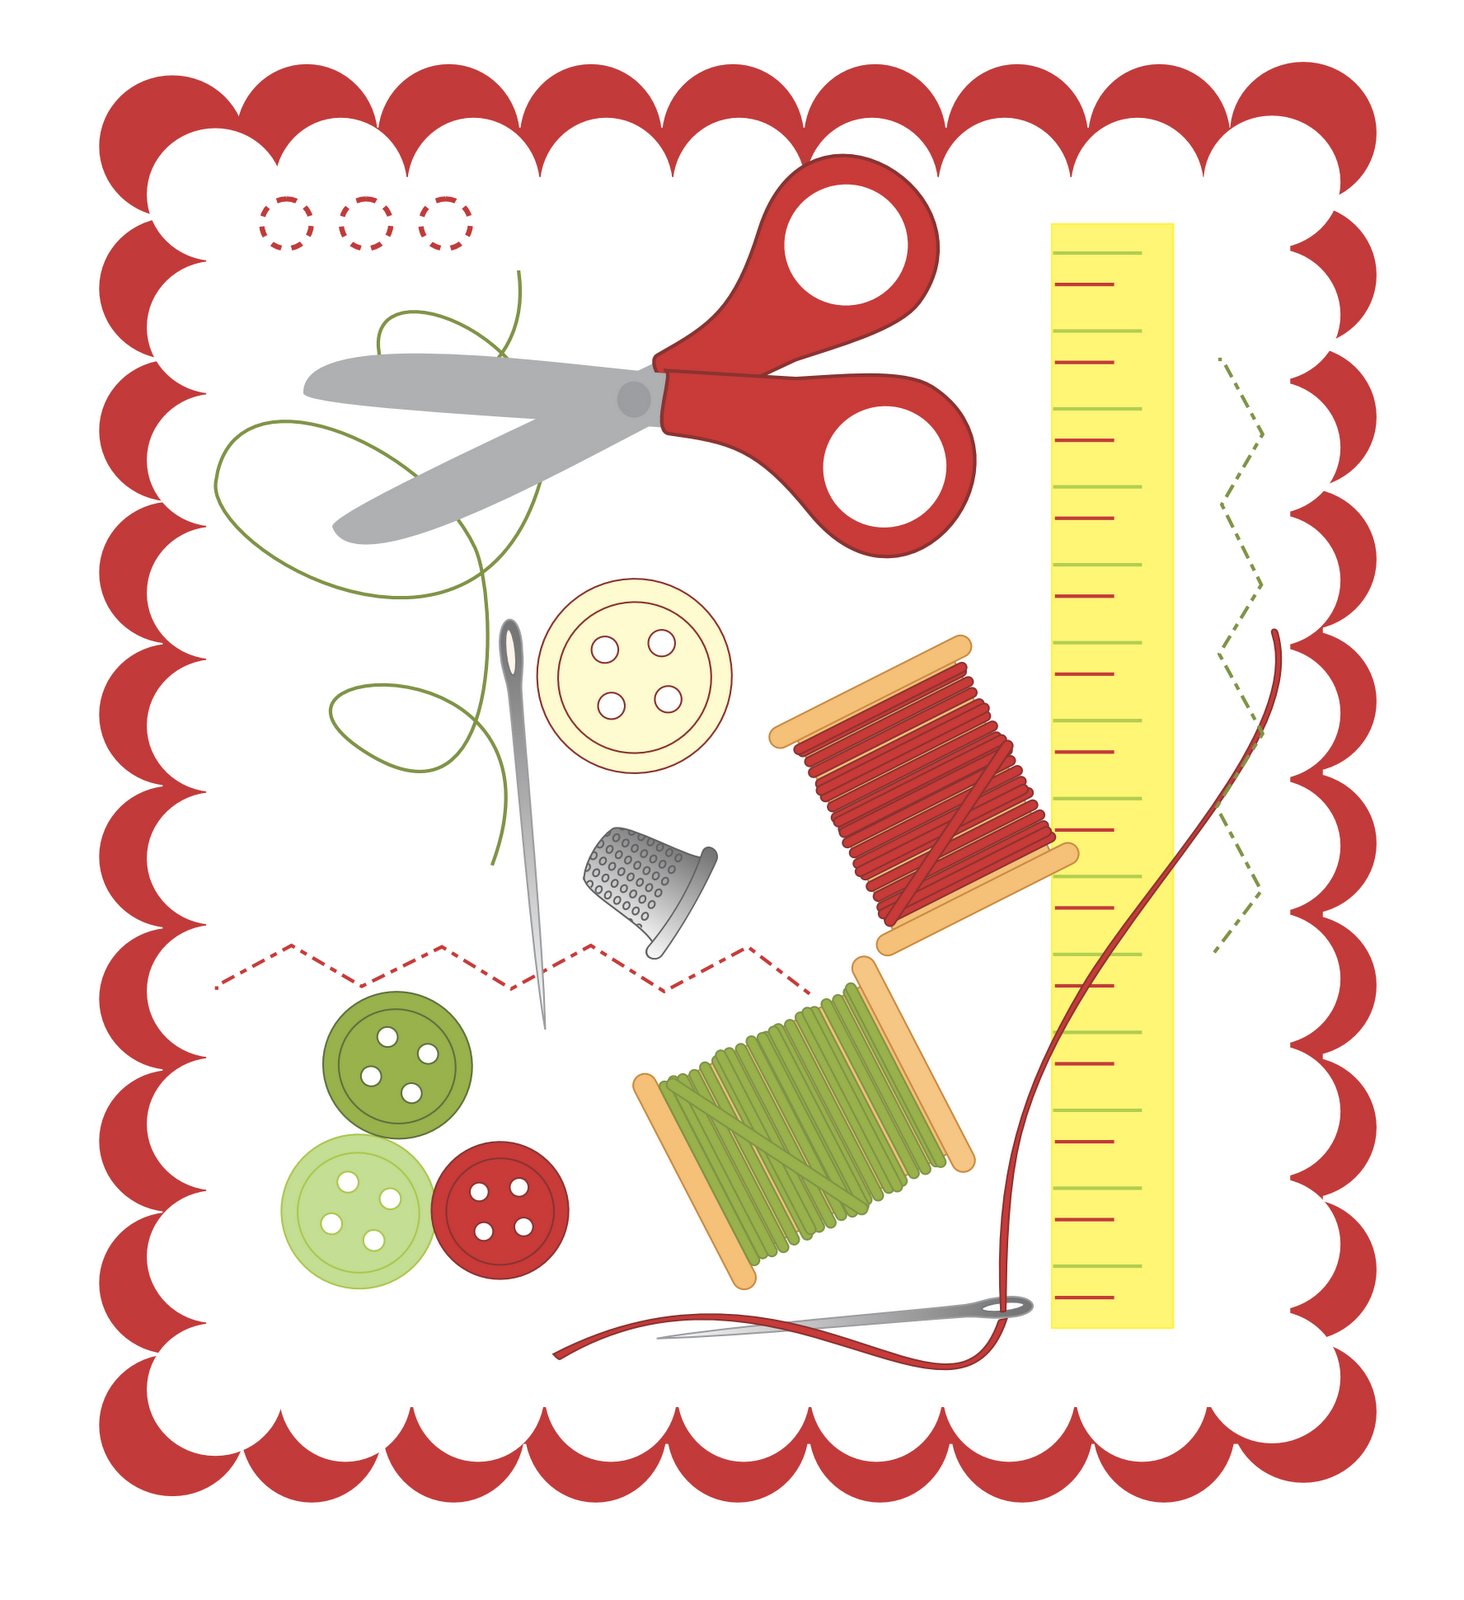 free clipart images sewing - photo #3